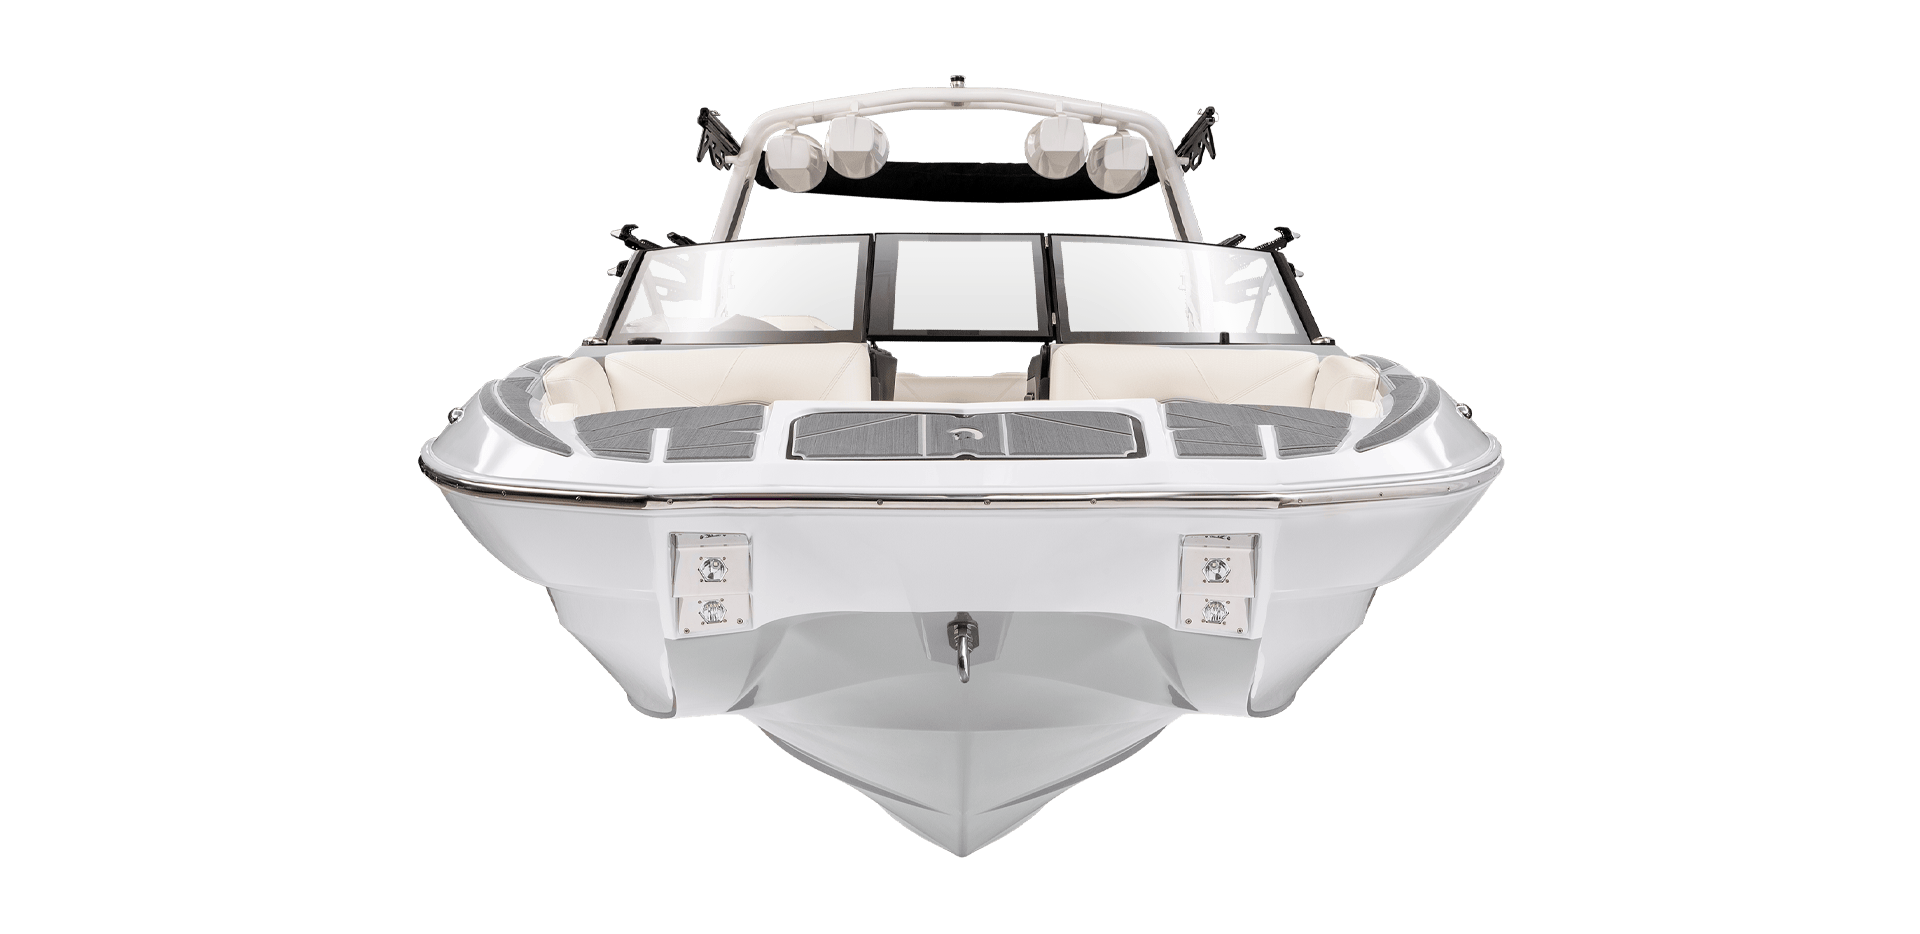 Front view of a white speedboat with a sleek design, featuring cushioned seating and multiple cup holders.